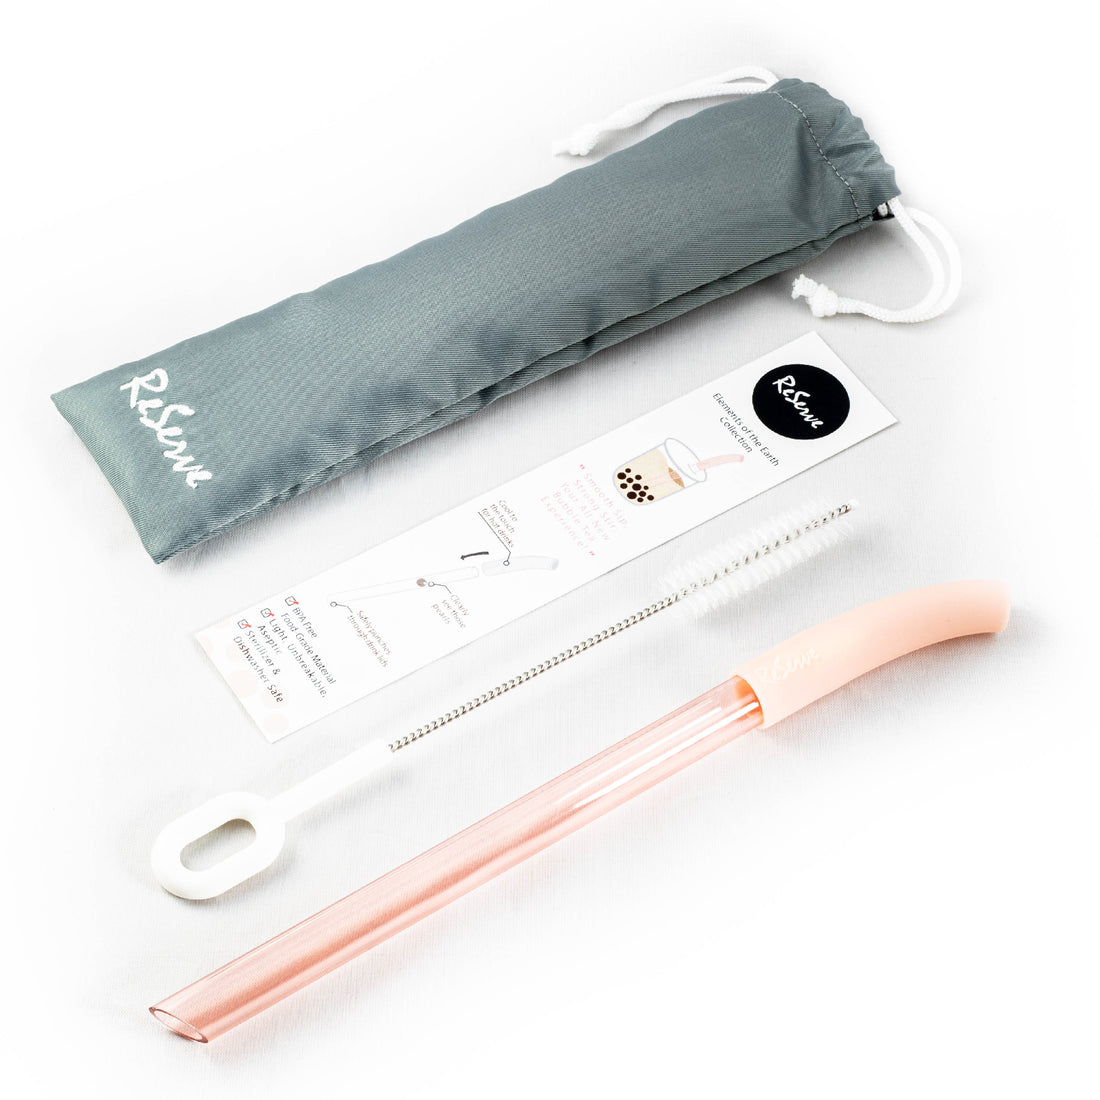 Rose gold bubble tea straw, reusable bag, and cleaning brush